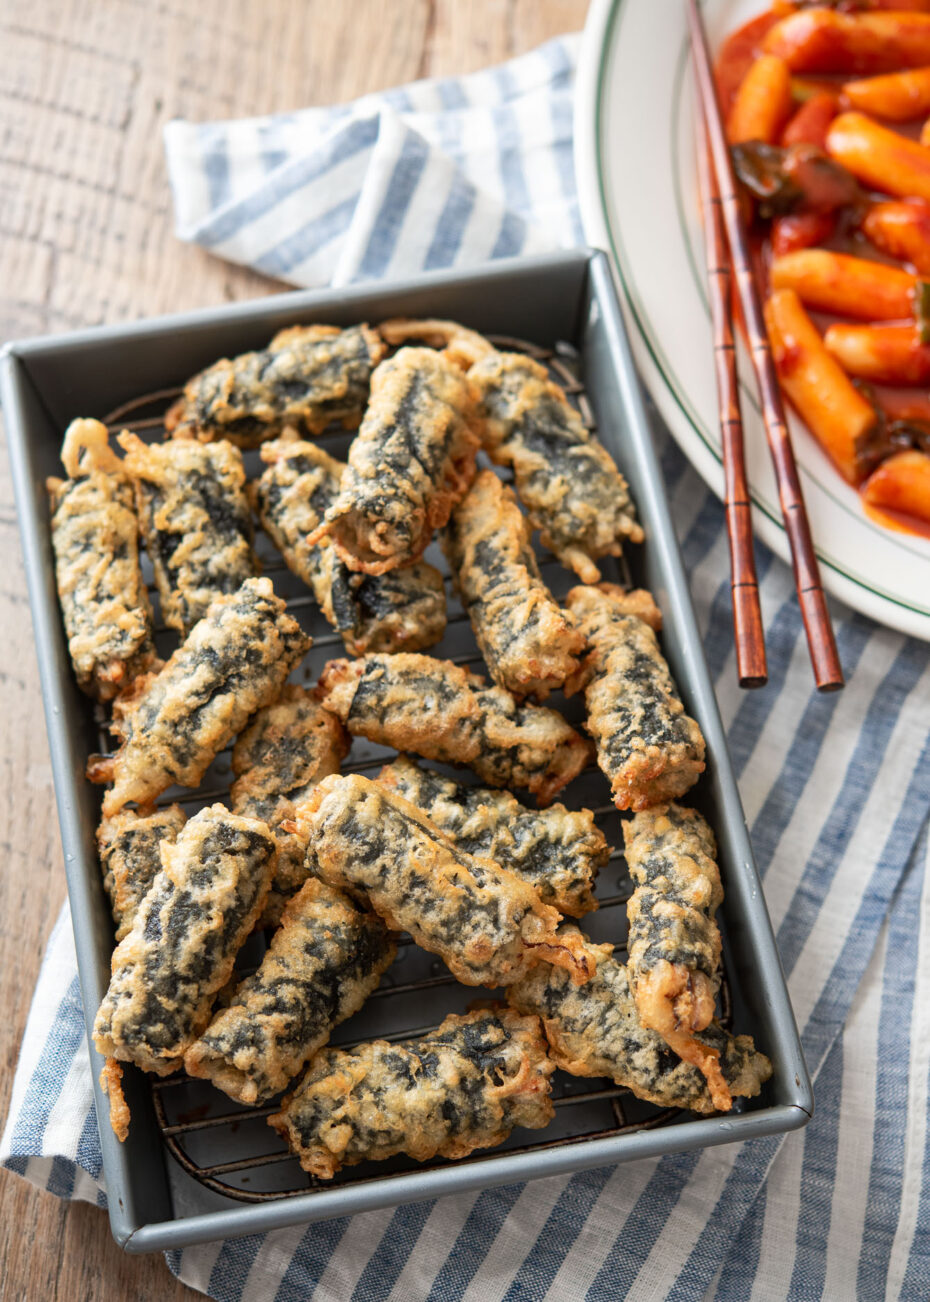 Dark green seaweed wrapped rolls fried in tempura is piled on a silver baking tray